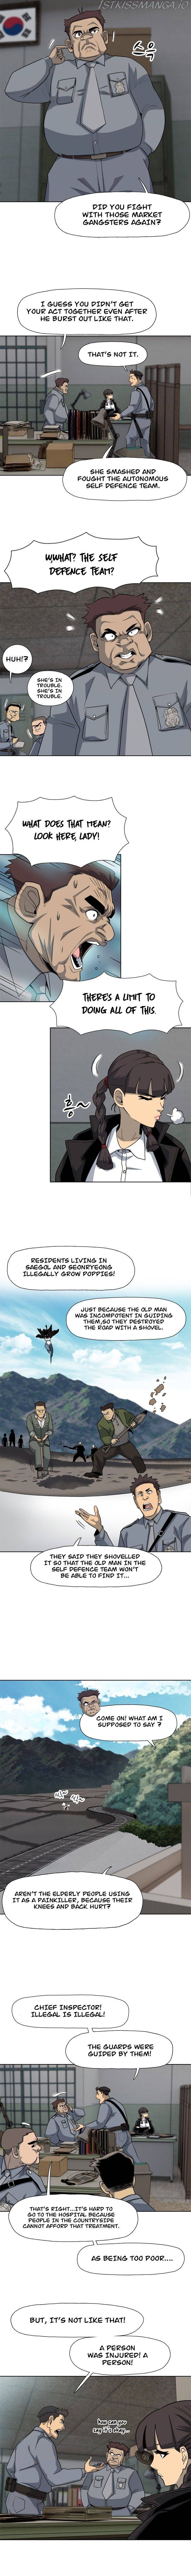 Rooftop Sword Master : Arachi The First Irregular - Page 2